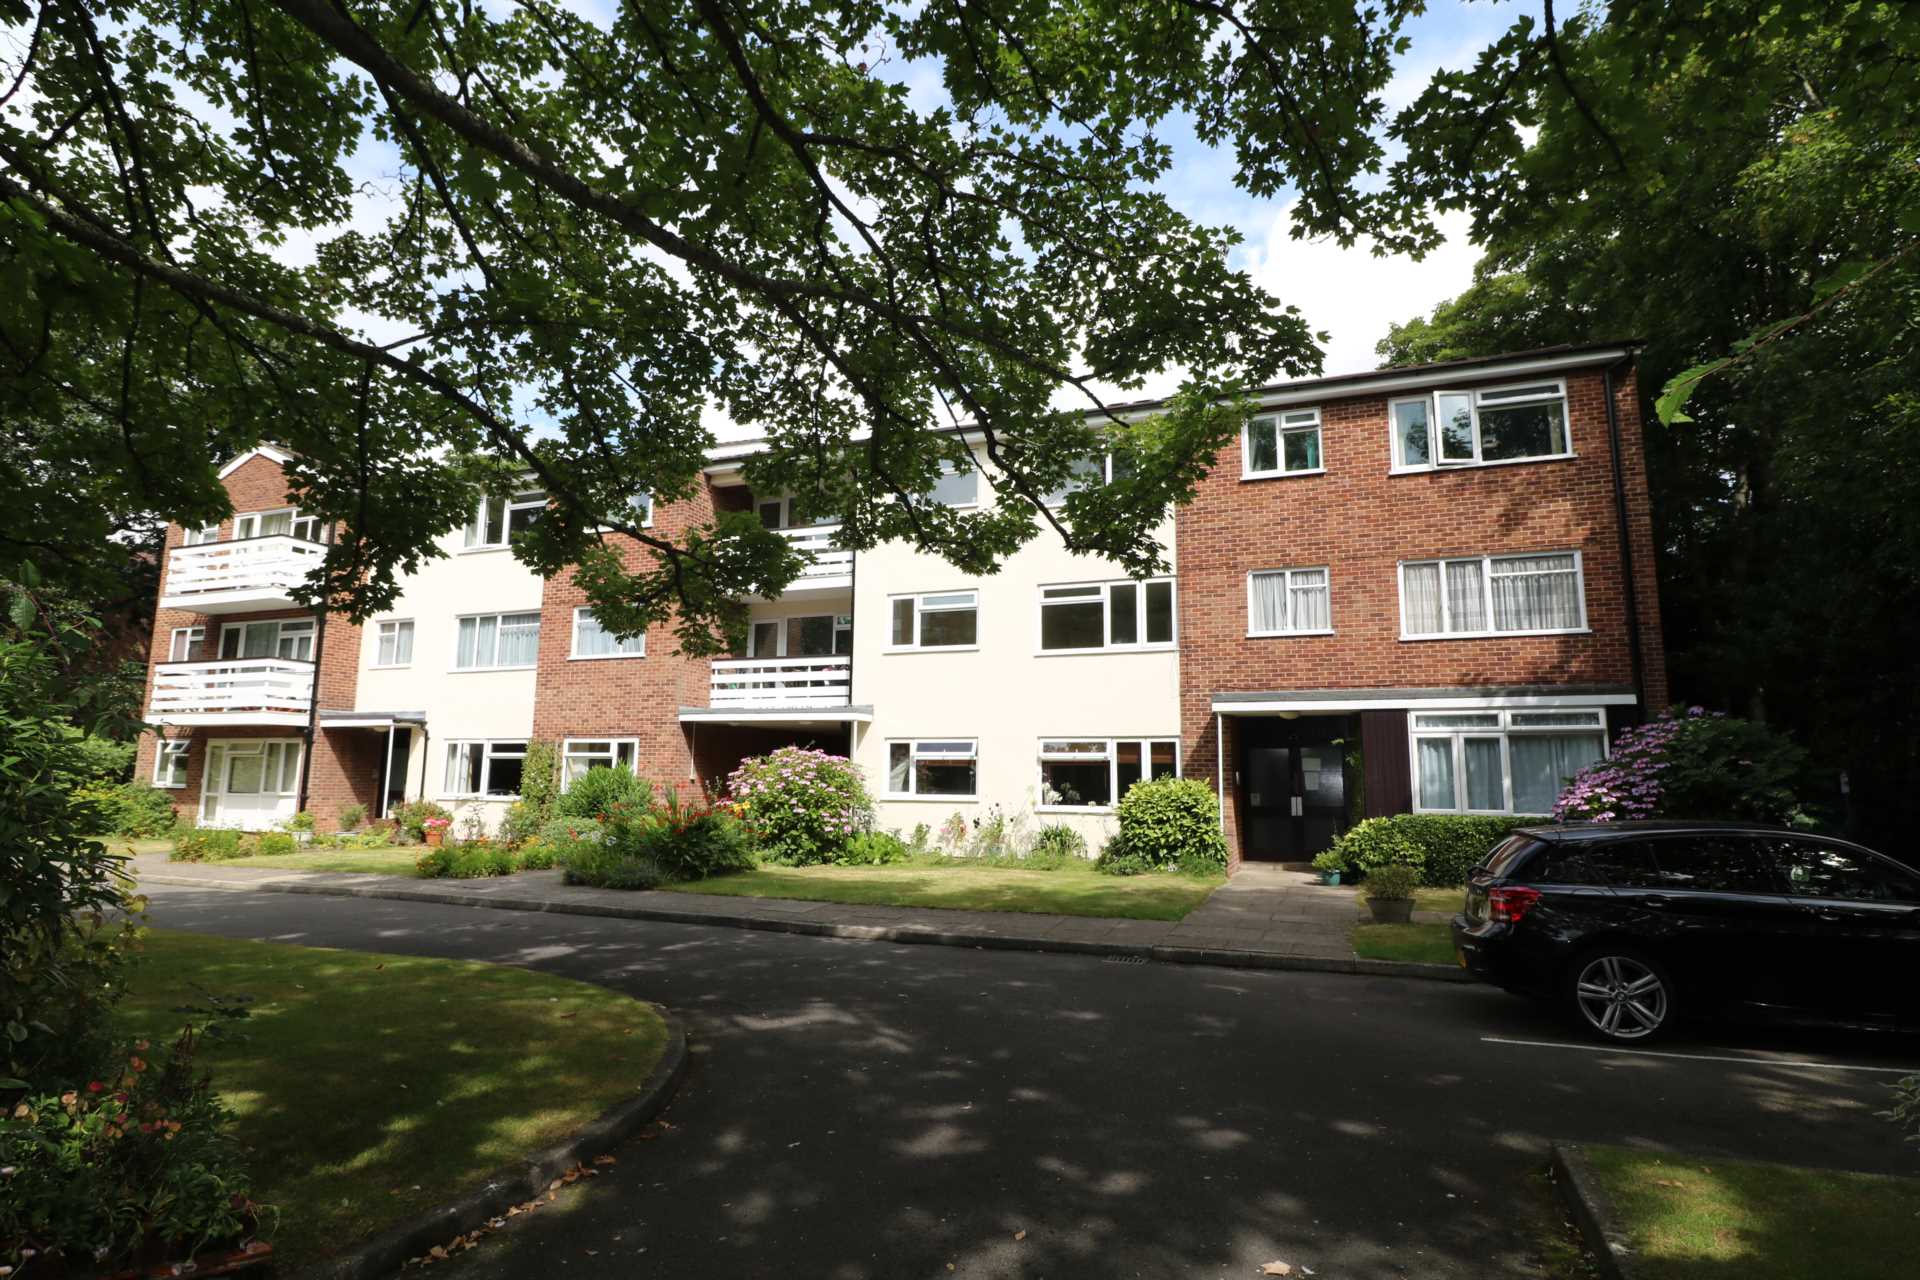 East Cliff Apartment No Chain Offers Invited £199,000